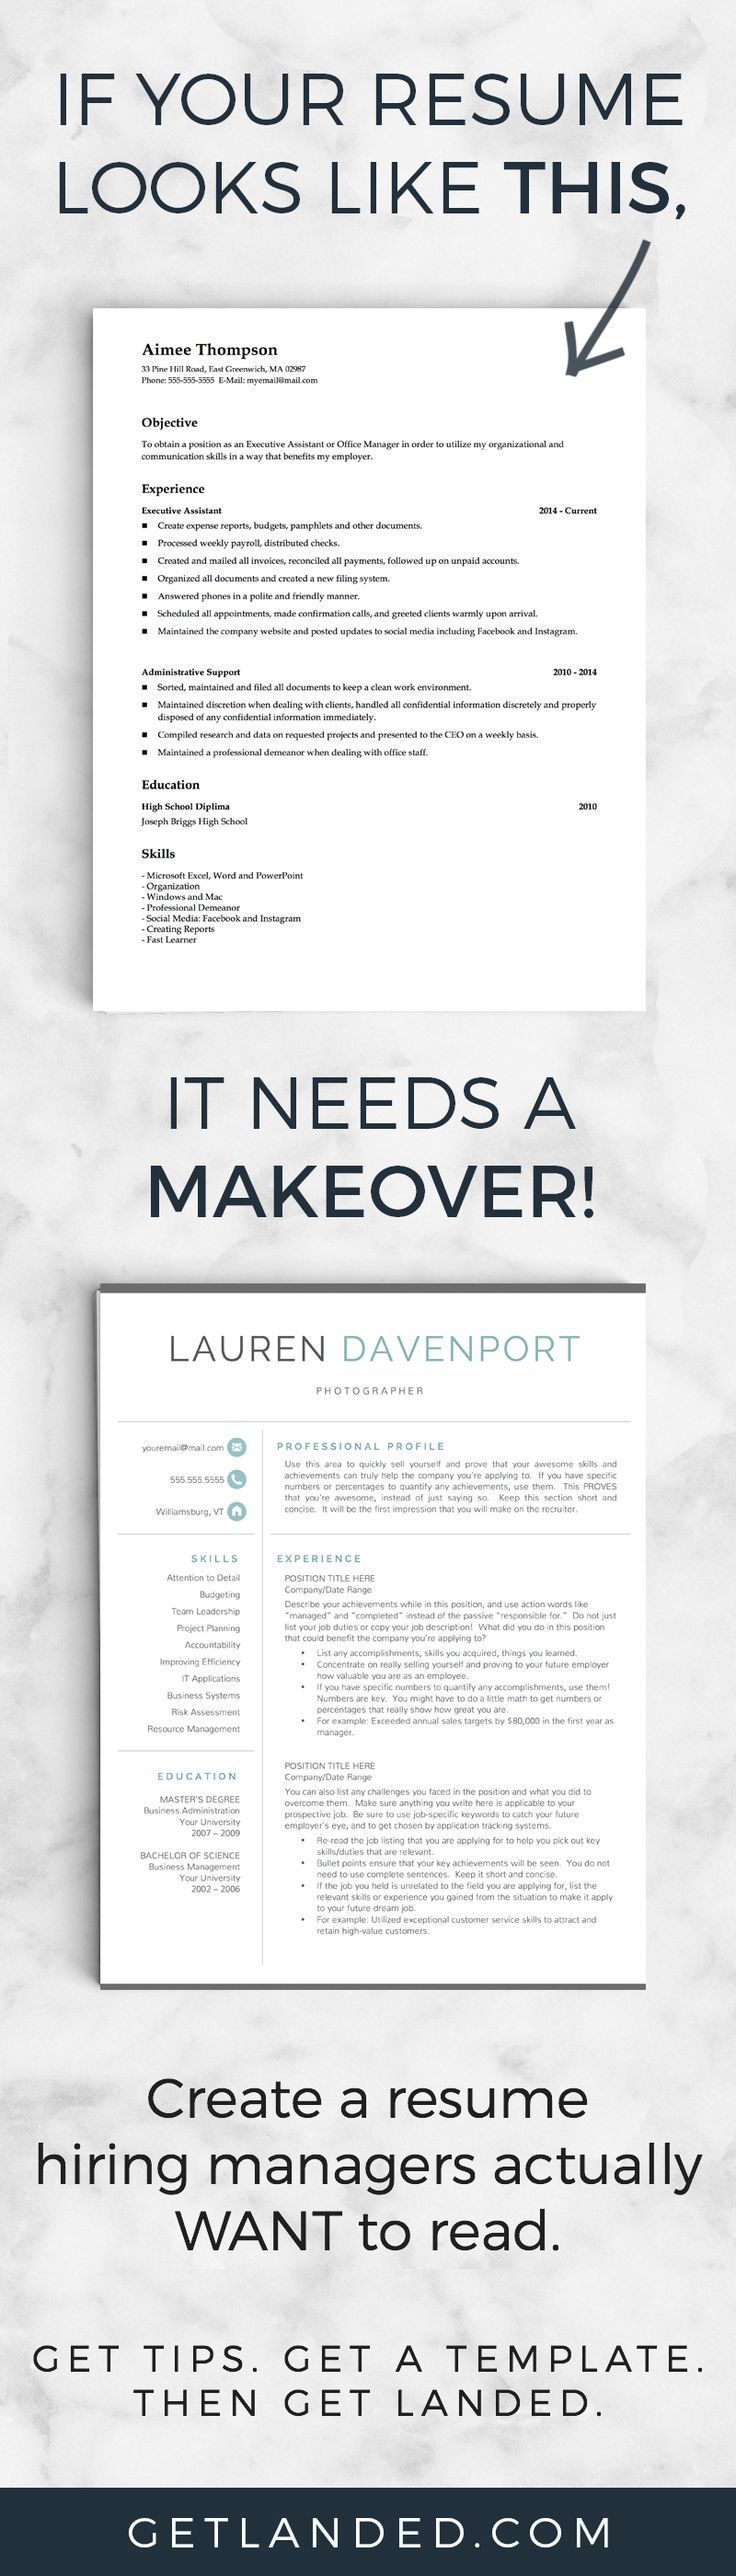 80% of candidates desperately need a resume makeover! Get a resume makeover today with a resume template and resume writing tips